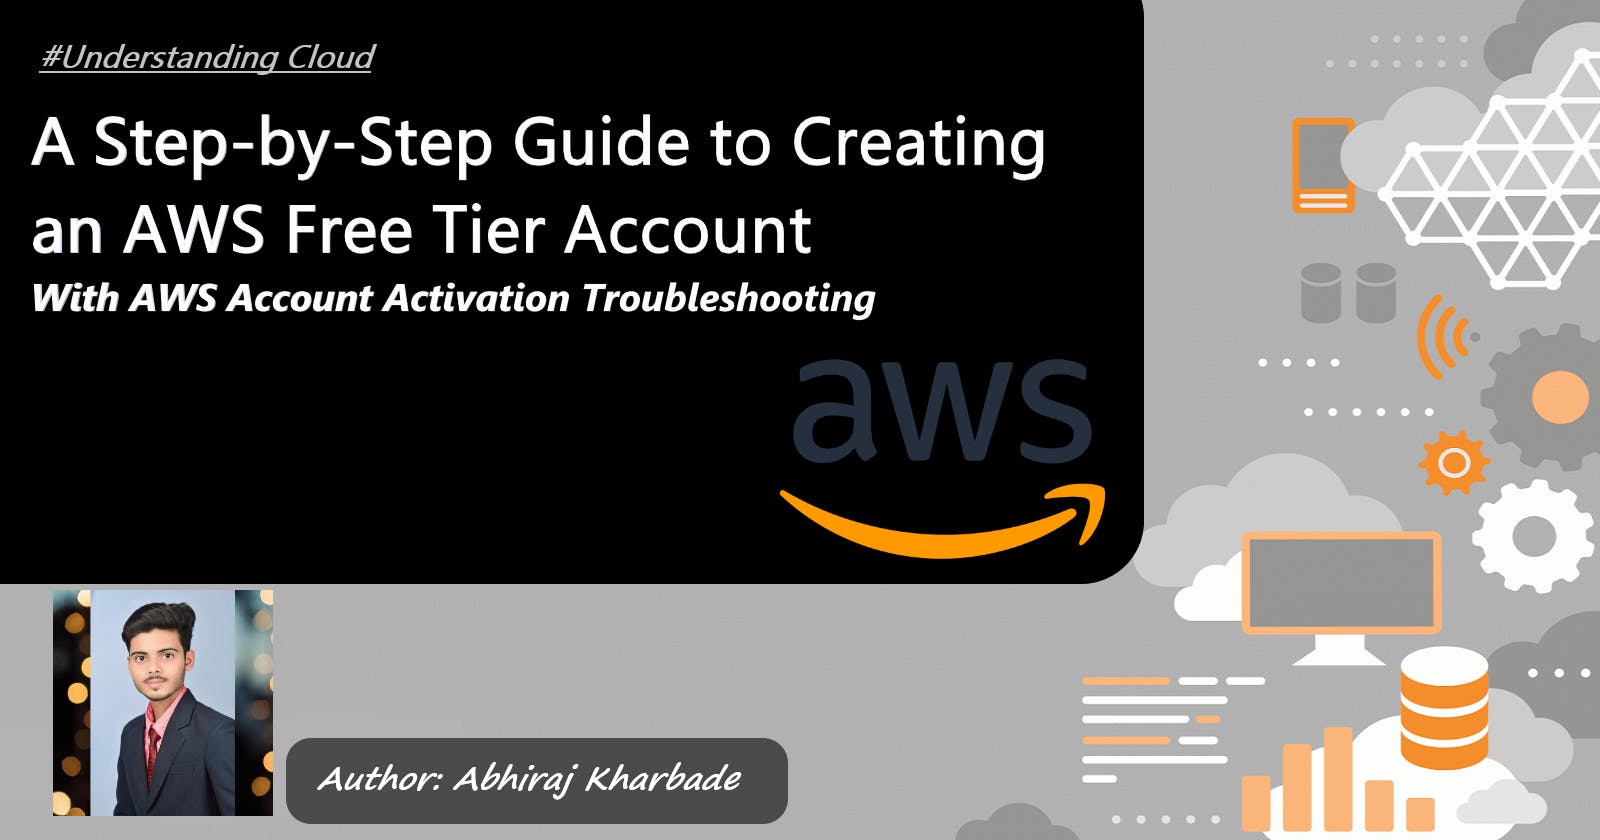 A Step-by-Step Guide to Creating an AWS Free Tier Account